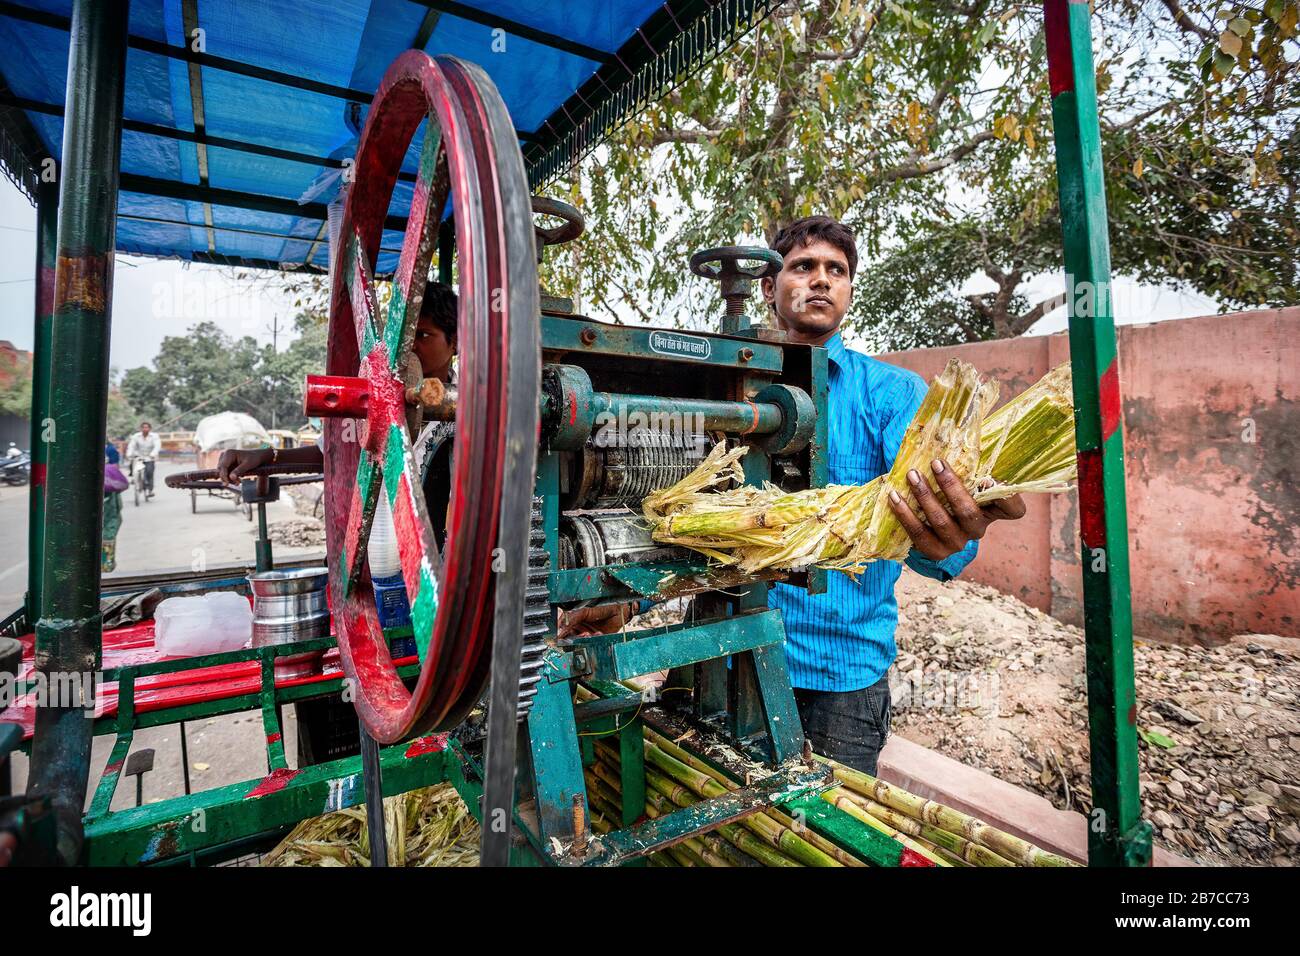 AGRA, UTTAR PRADESH, INDIA - FEBUARY 24, 2015: Young Indian man making sugarcane juice which is very famous in India Stock Photo